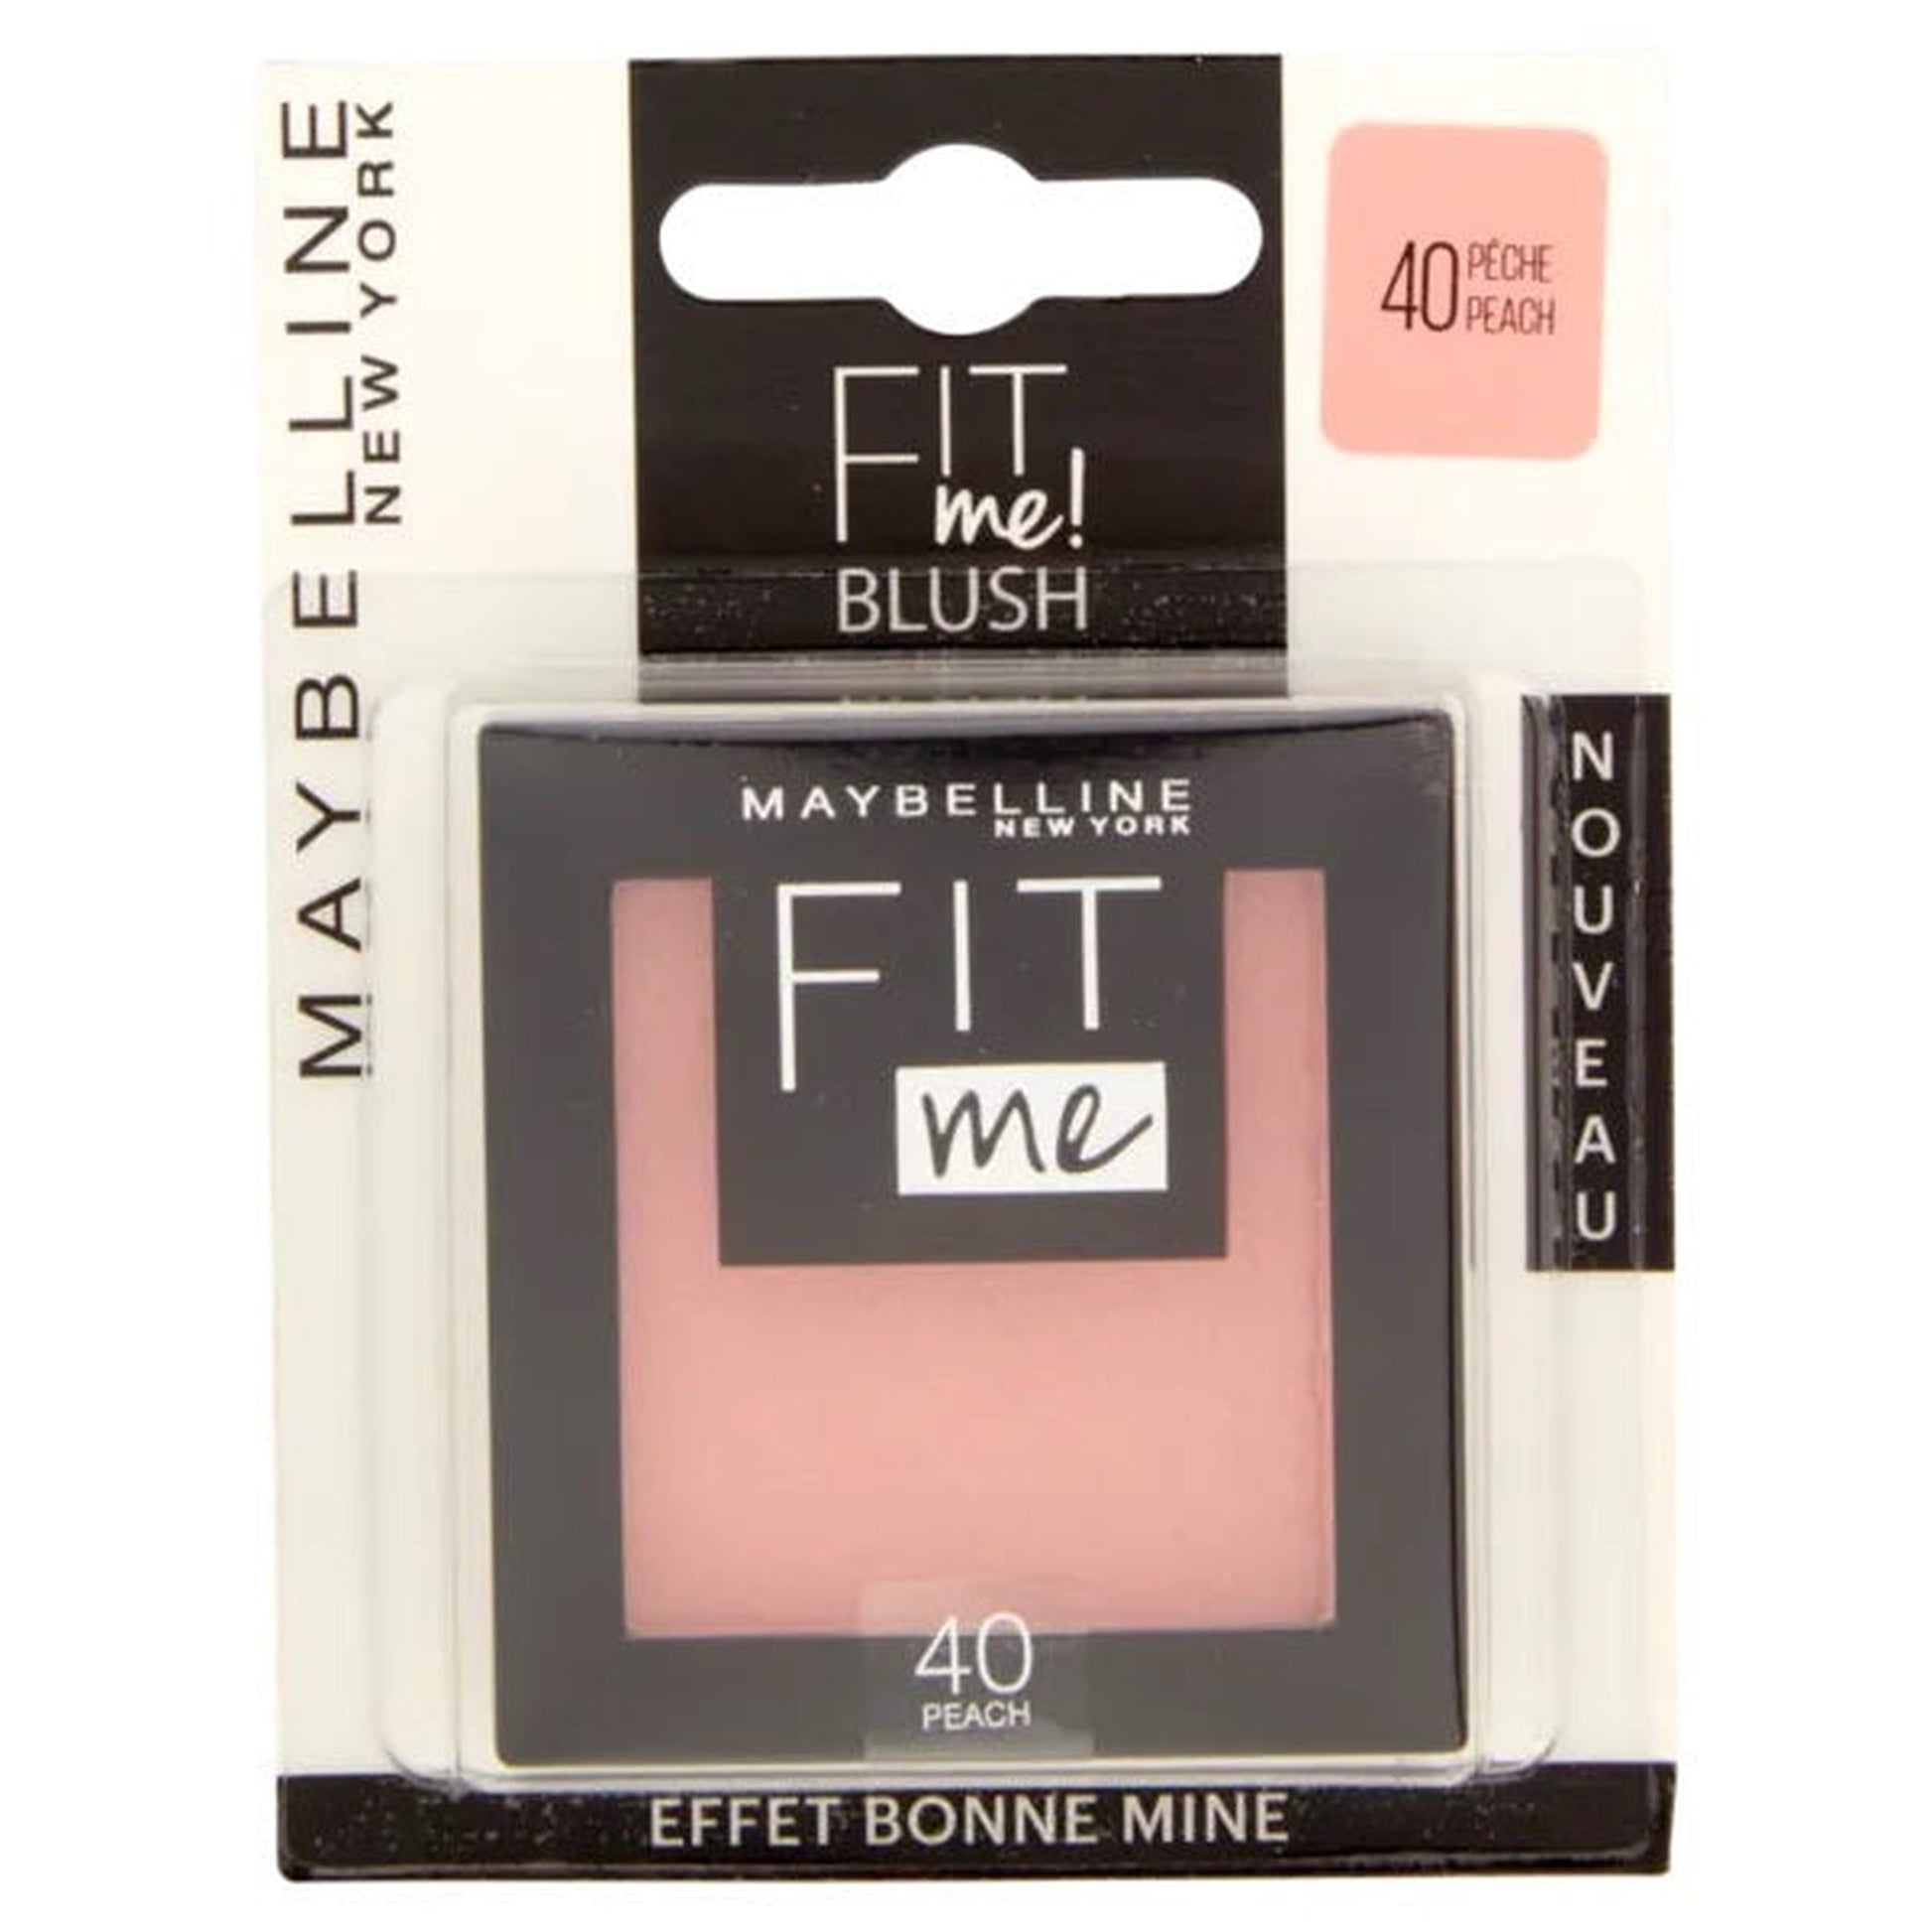 Maybelline Fit Me Blusher 40 Peach-Maybelline-BeautyNmakeup.co.uk